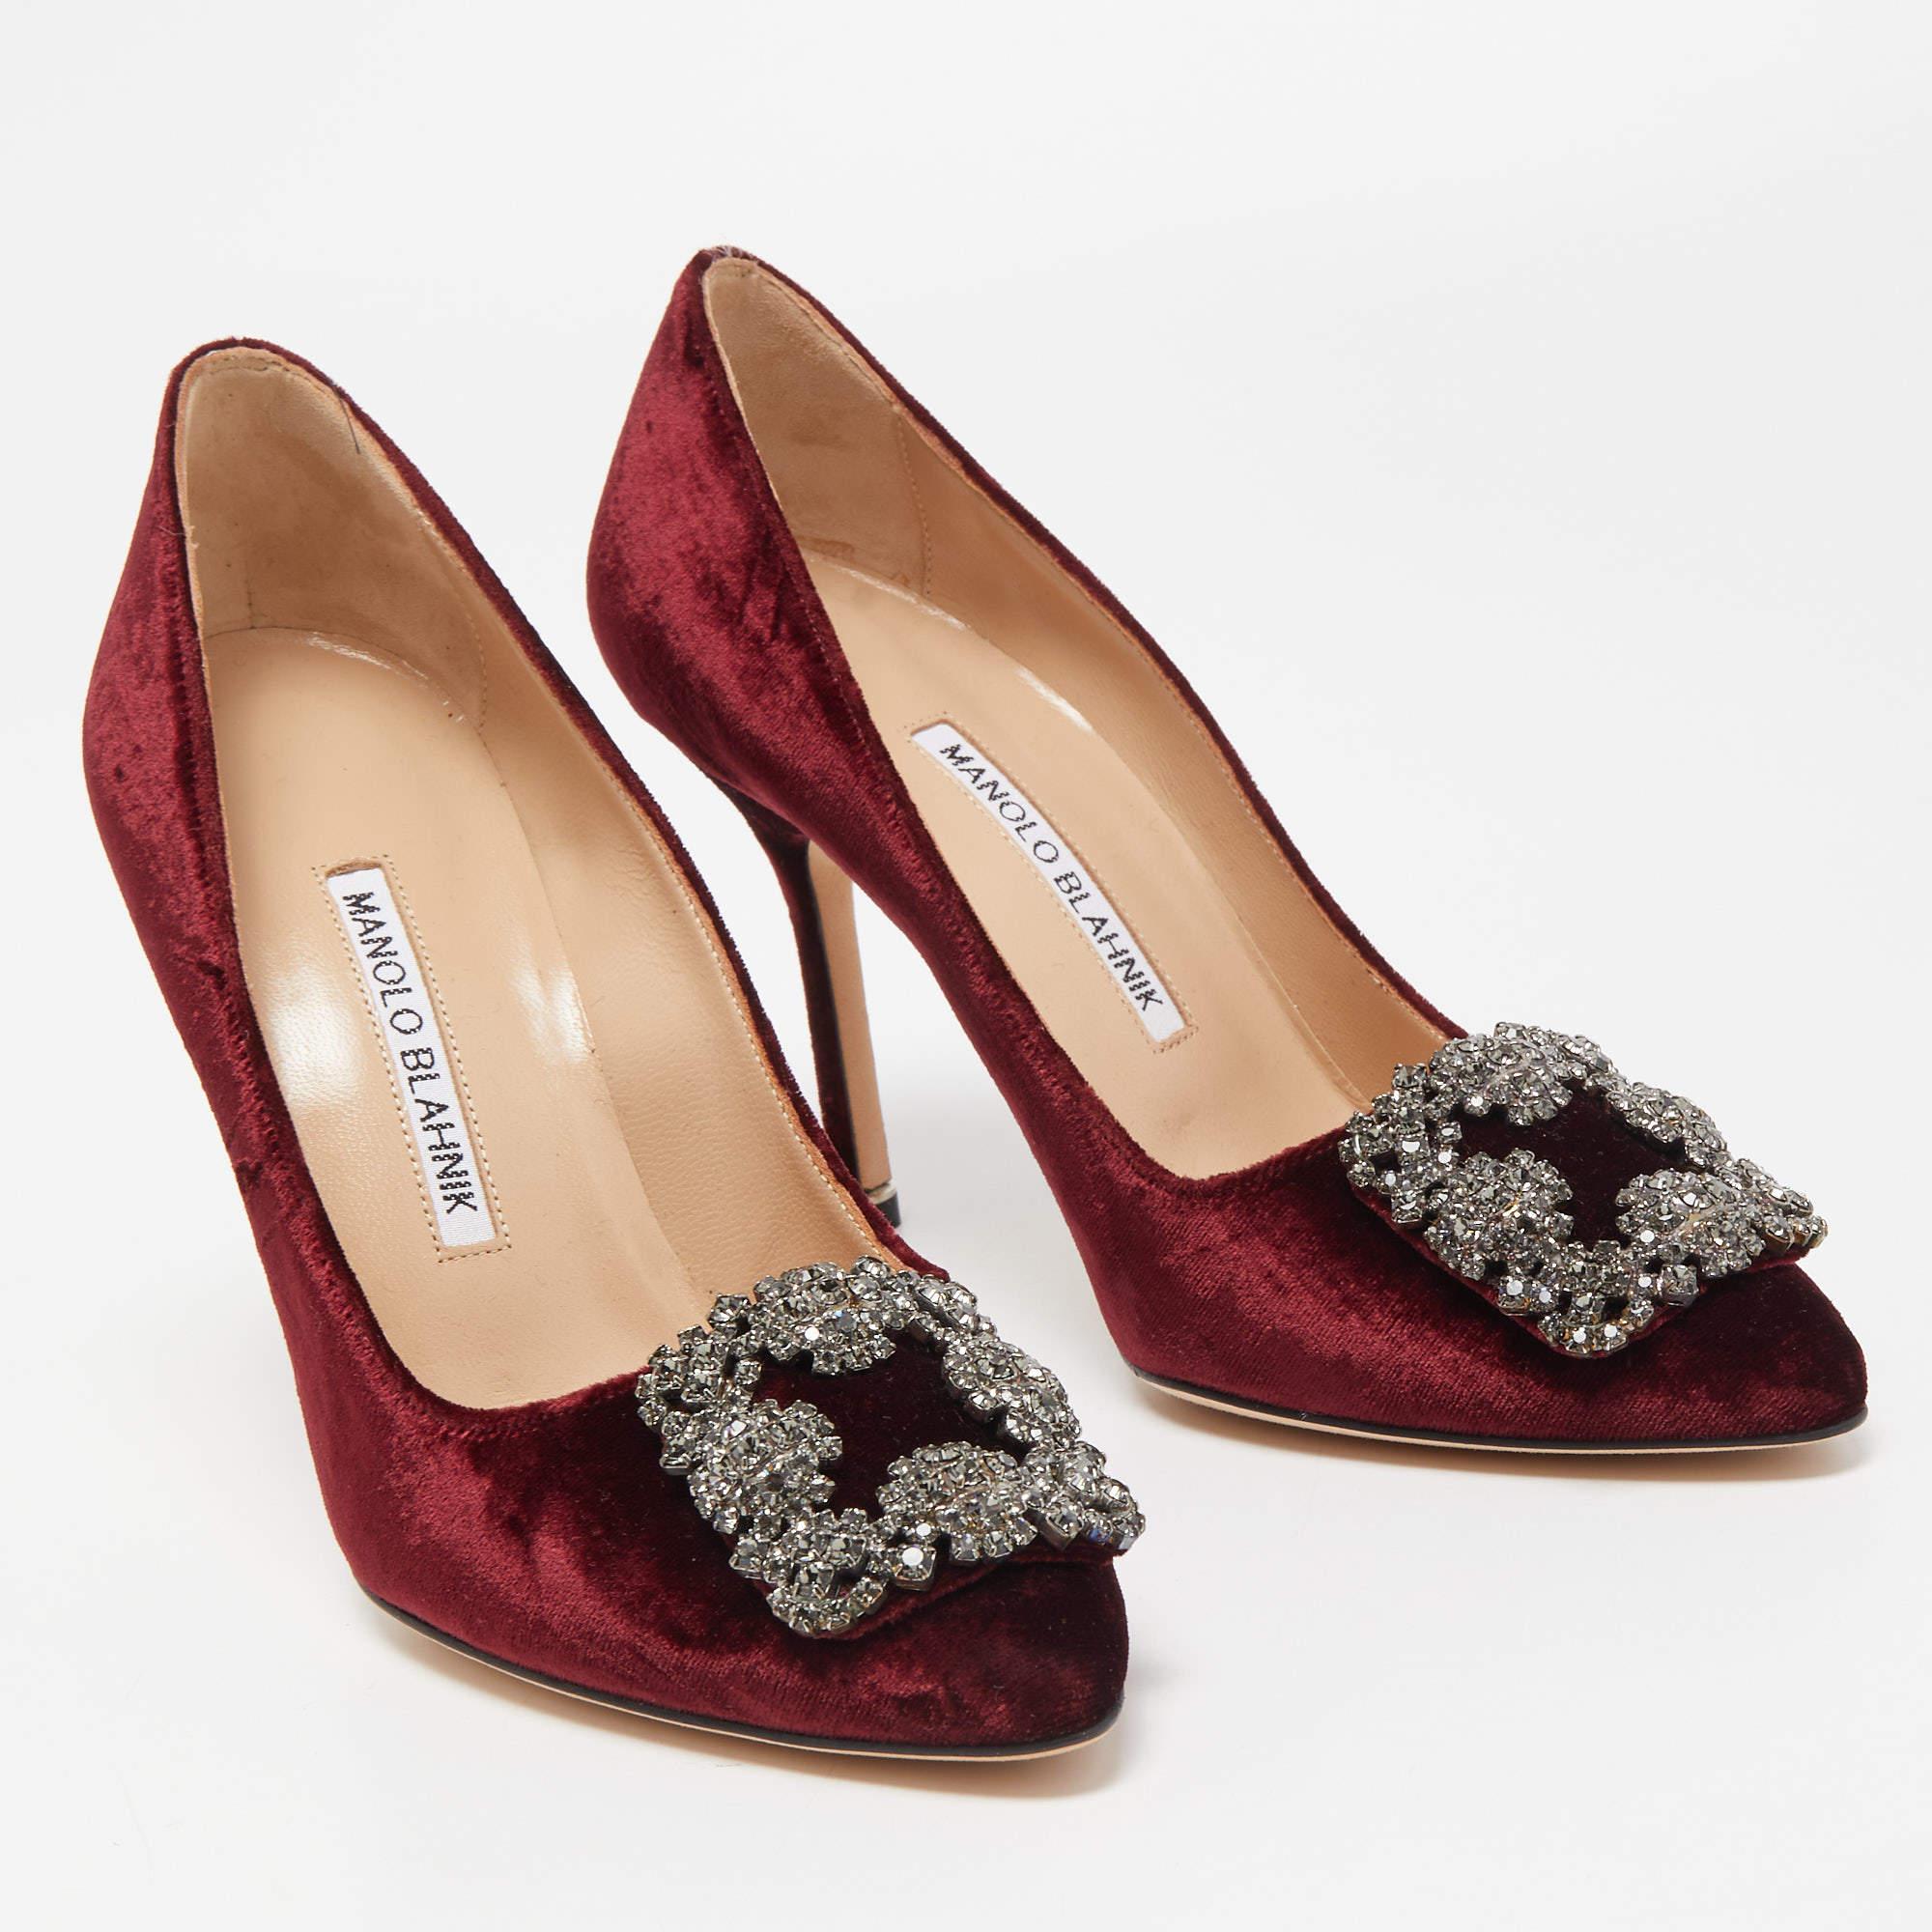 The 10cm heels of this pair of Manolo Blahnik pumps will reflect grace and luxury in every step. Made from velvet, it is made striking with crystal-embellished buckle detailing on the toes and exhibits branded insoles.

